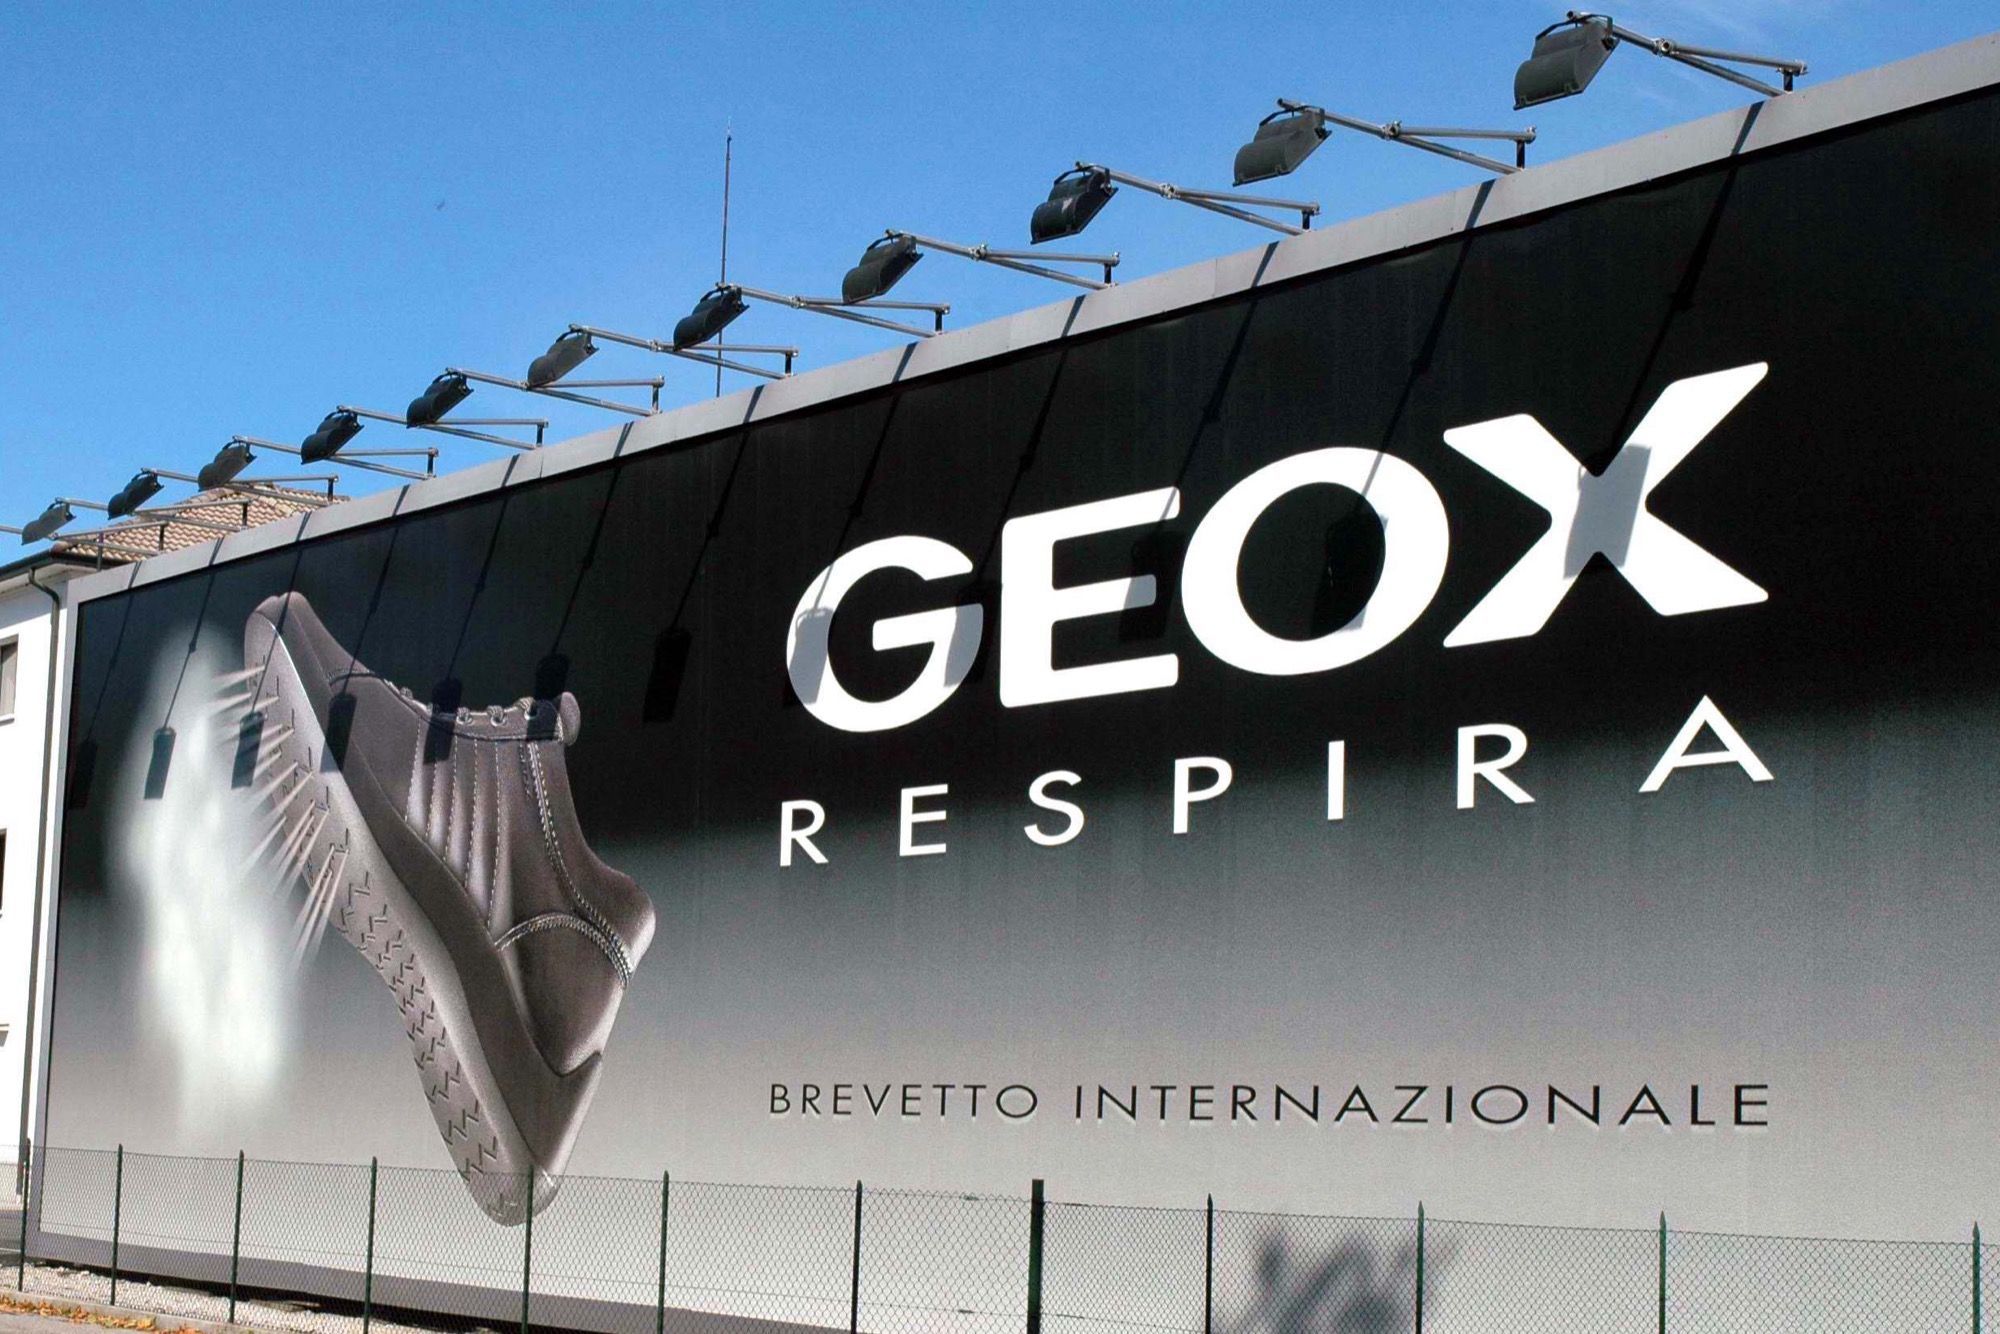 What to Geox, the brand of "the that breathes"